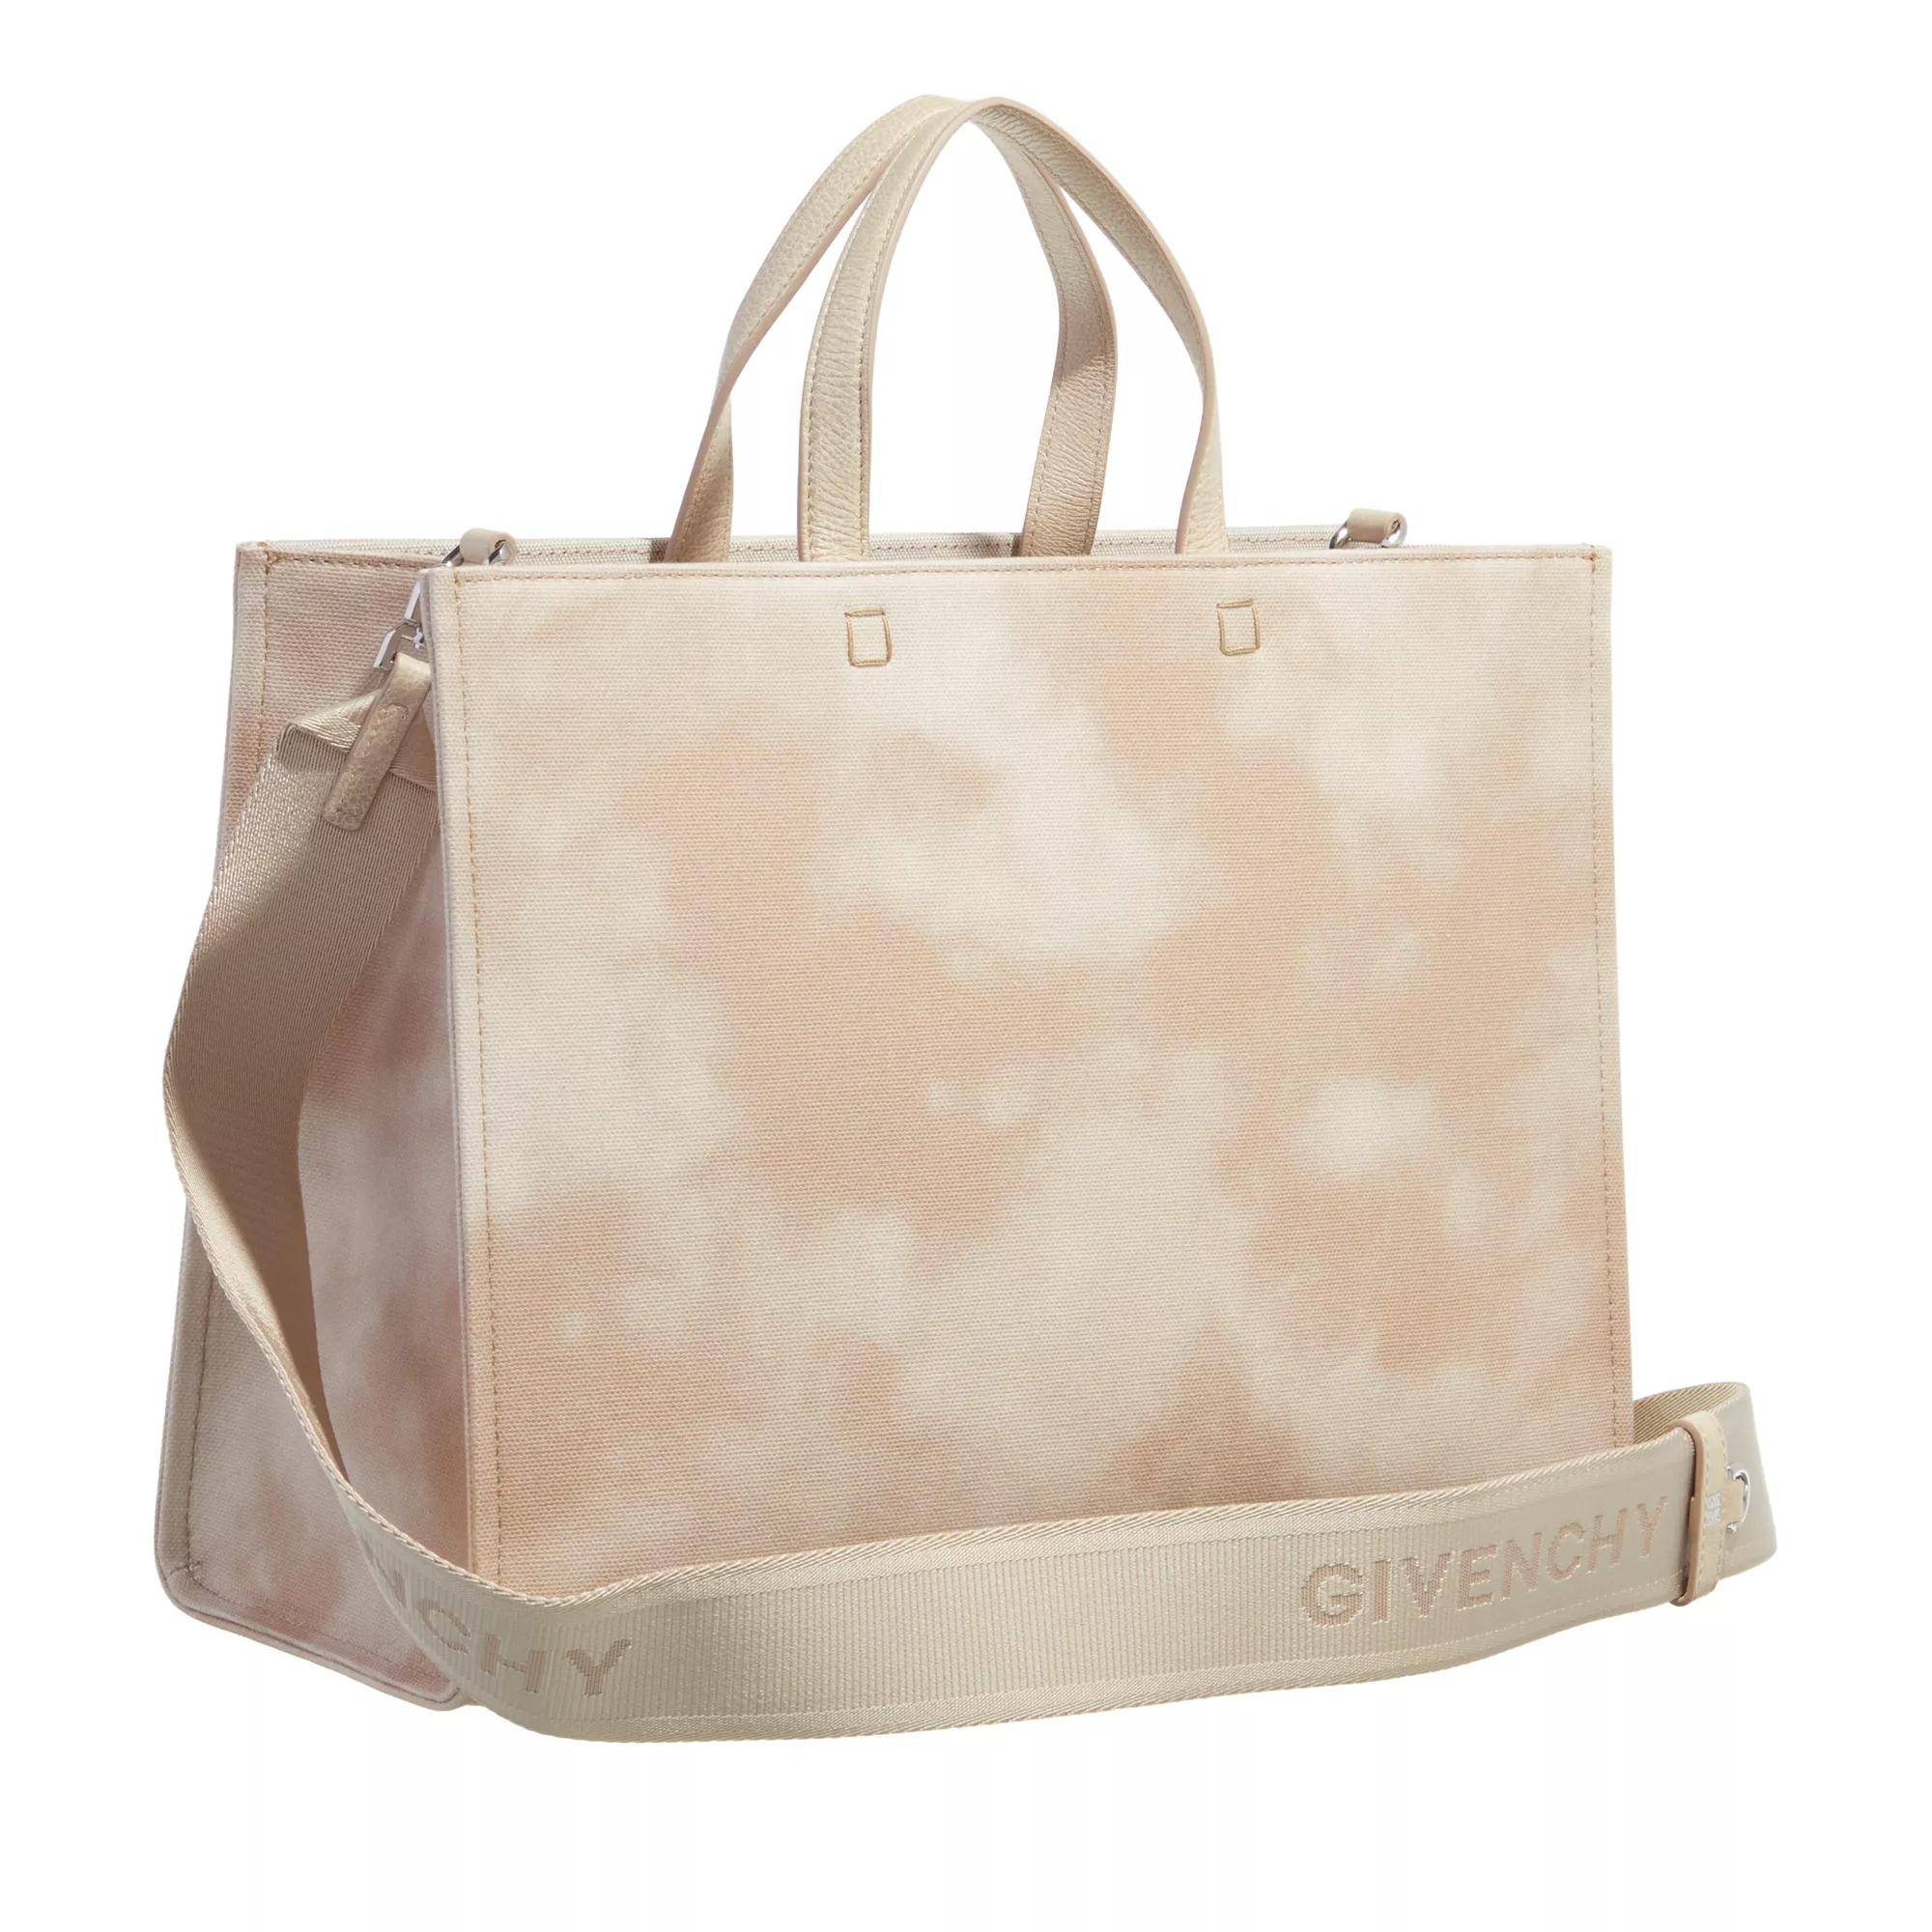 Givenchy Shoppers G Tote Shopping Bag For Woman in beige